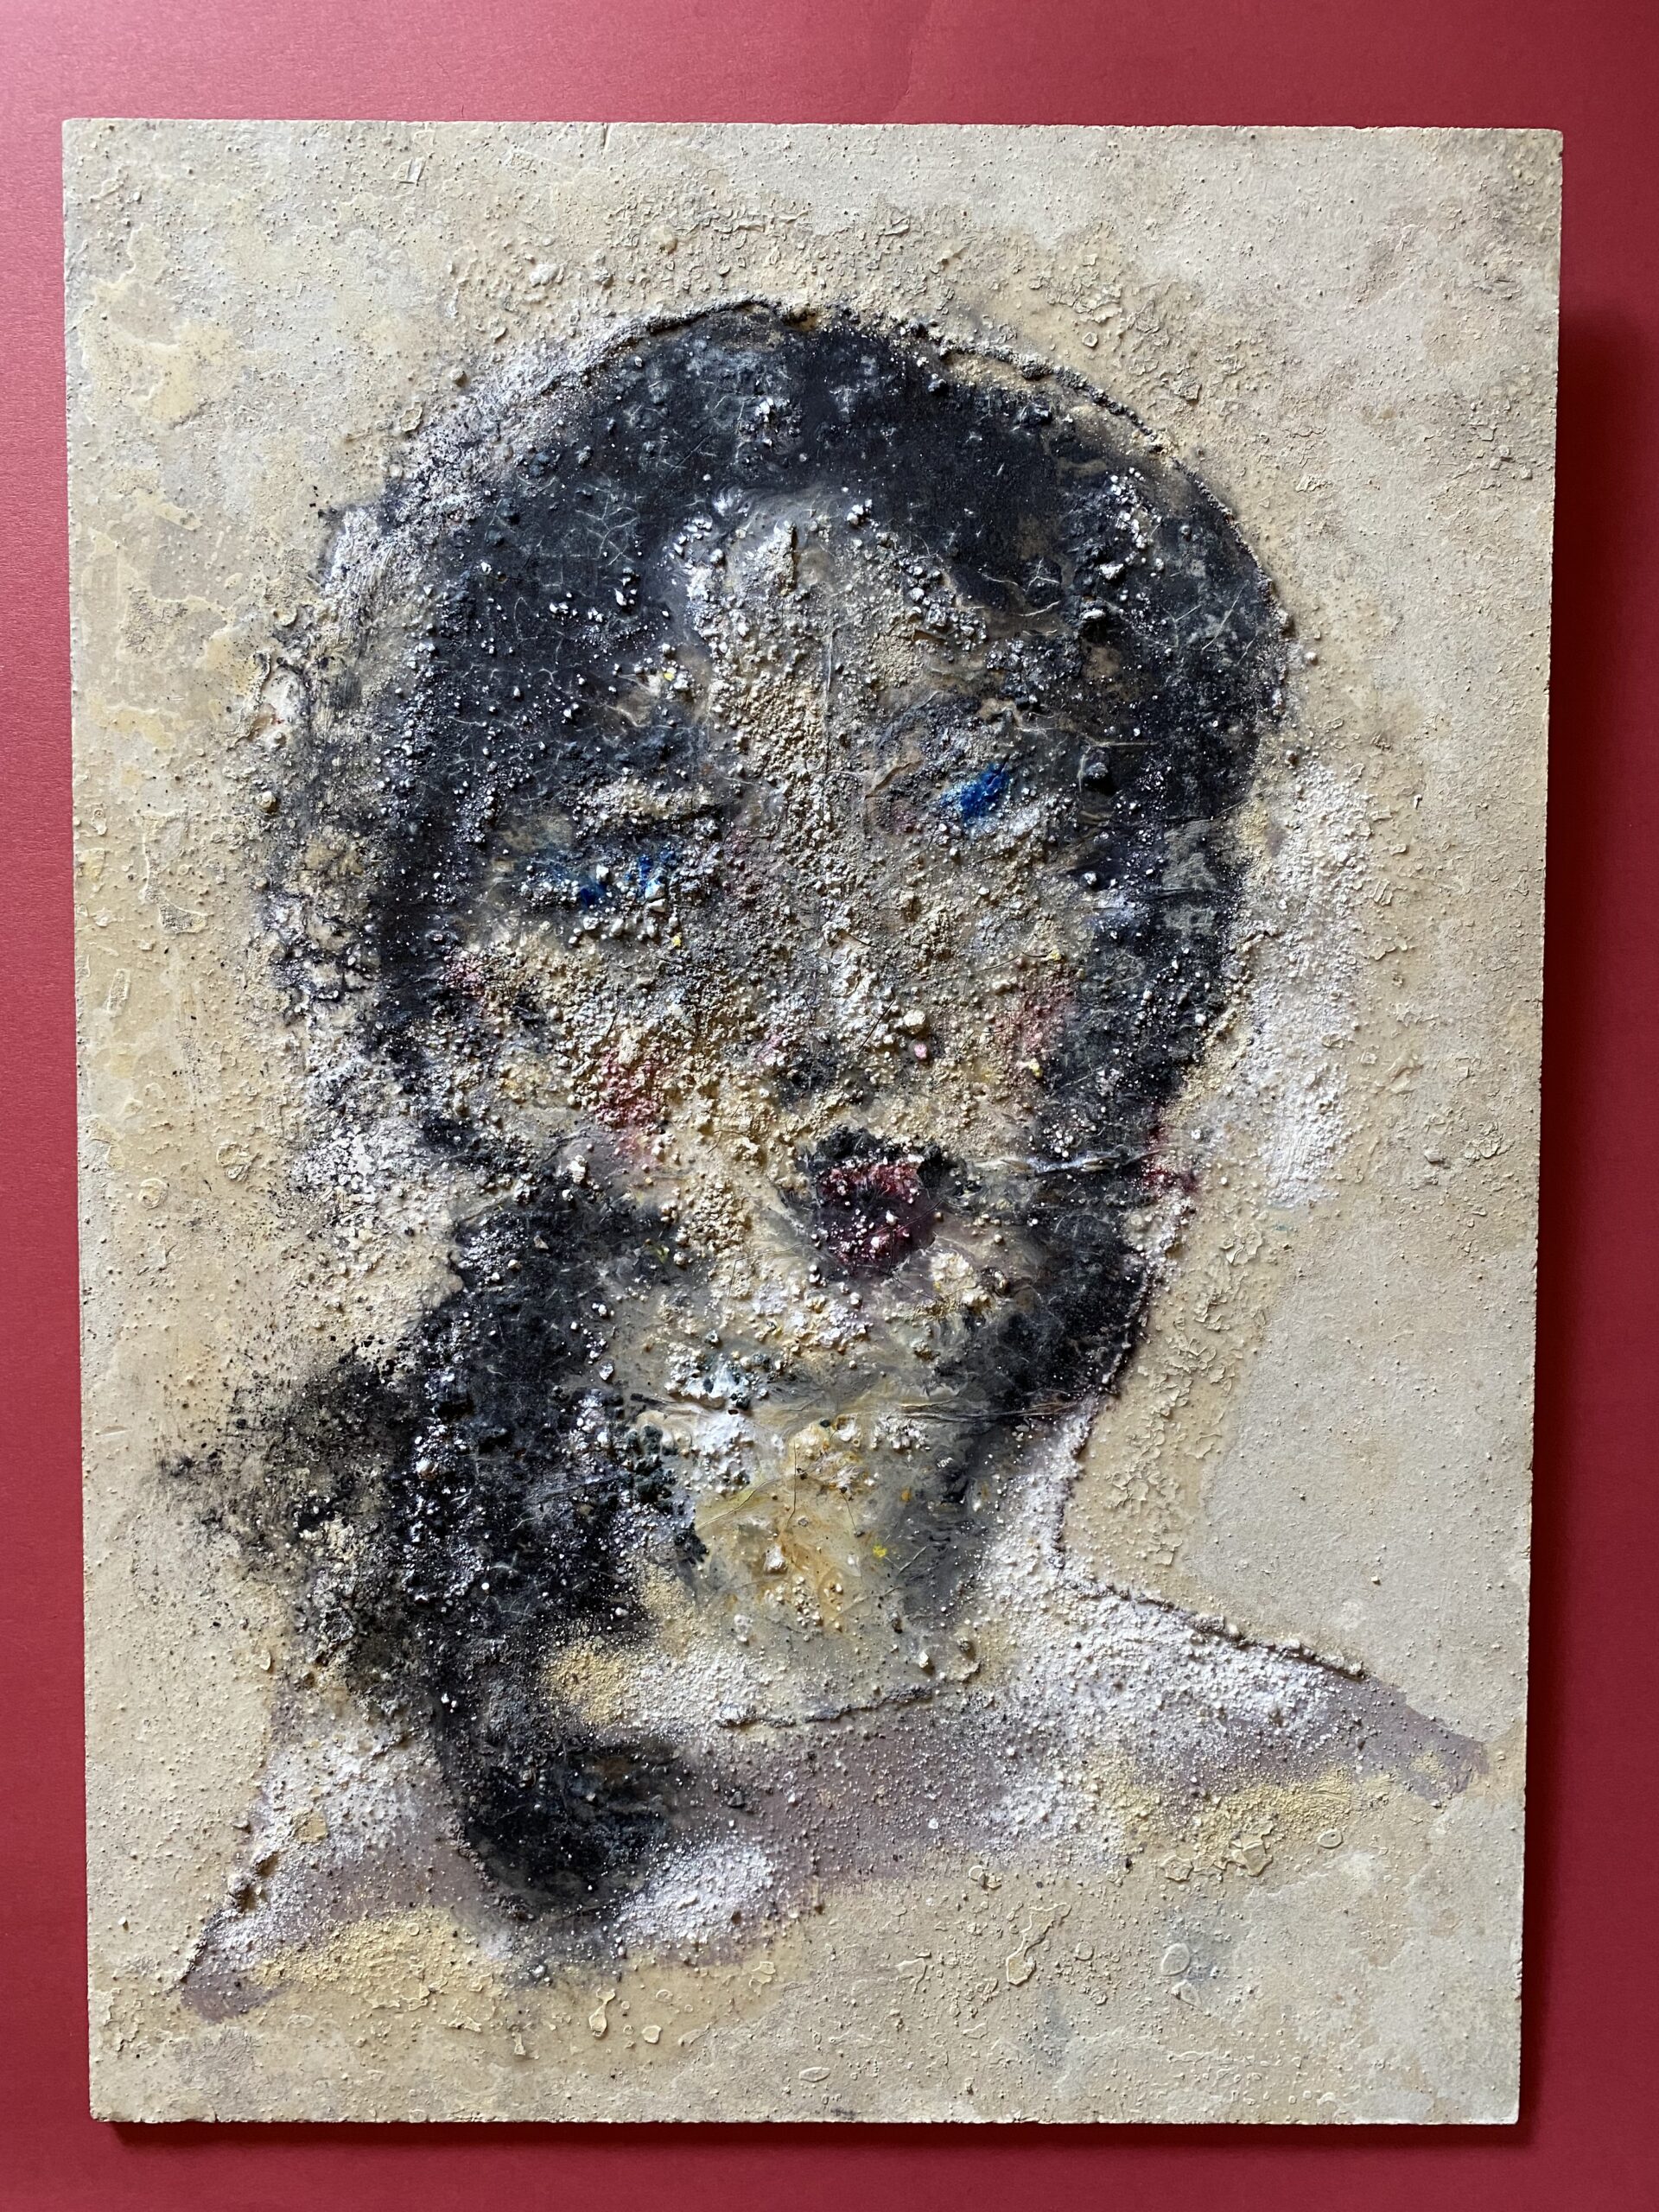 Unusual Textured Abstract Oil Painting on Heavy Fiberboard of a Woman. She has a tag on the back where she sold at Bonham's Auction. Unframed she measures 15.75" x 21.5"~$395